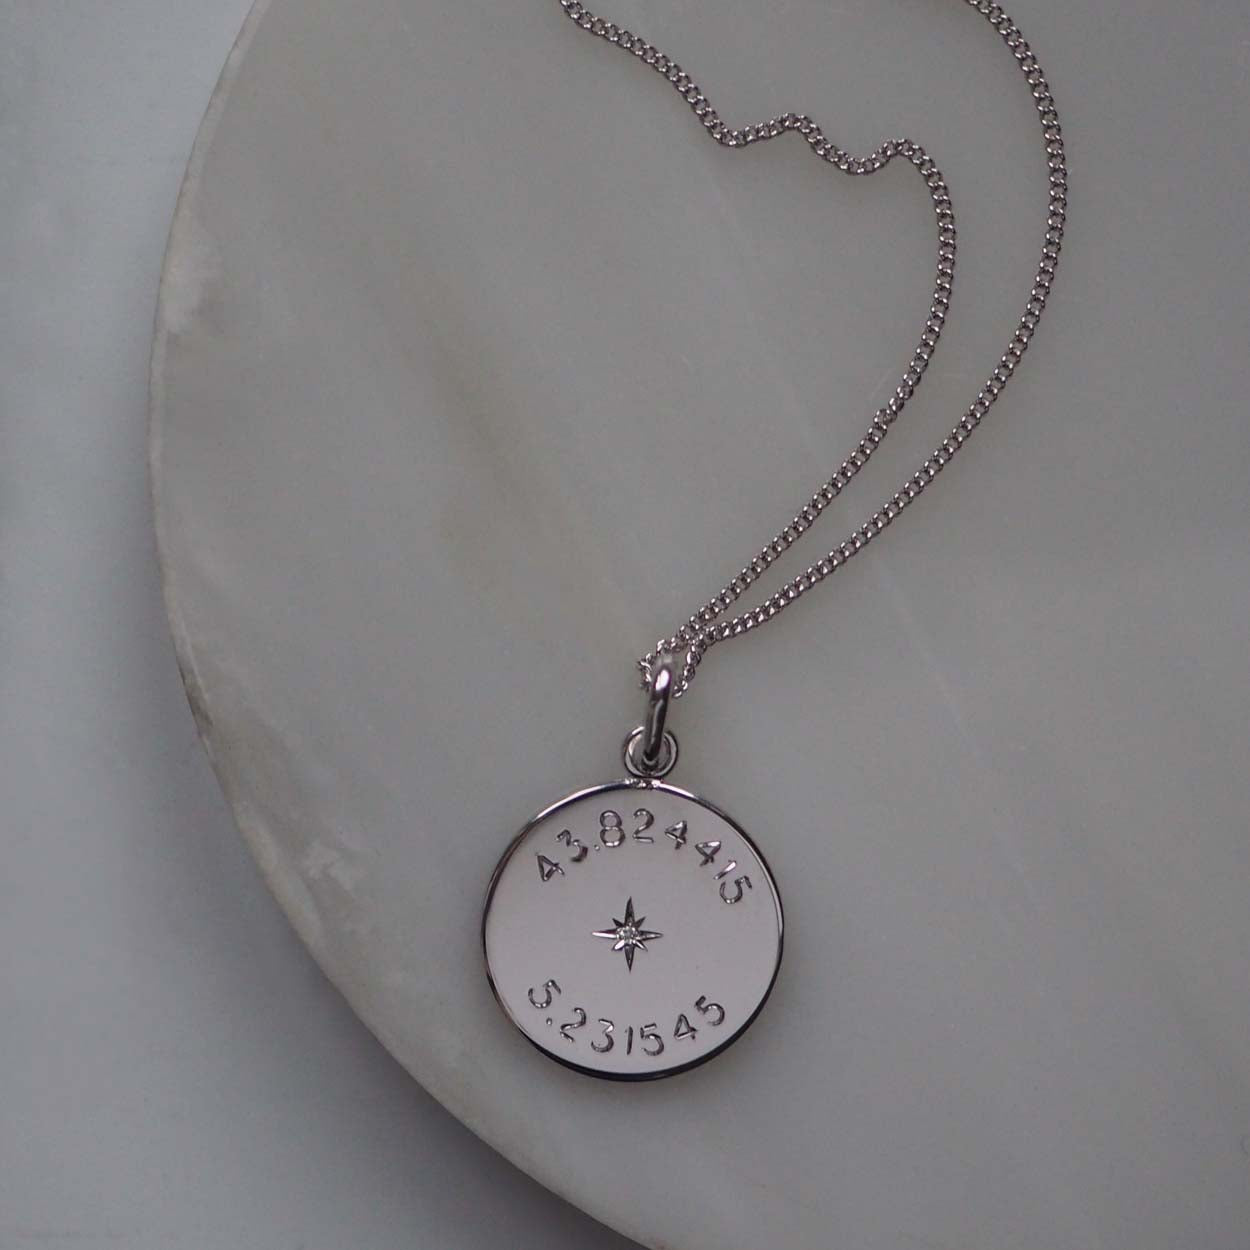 Sterling silver Diamond Latitude and Longitude Necklace with personalized coordinates, symbolizing celestial navigation and cherished memories